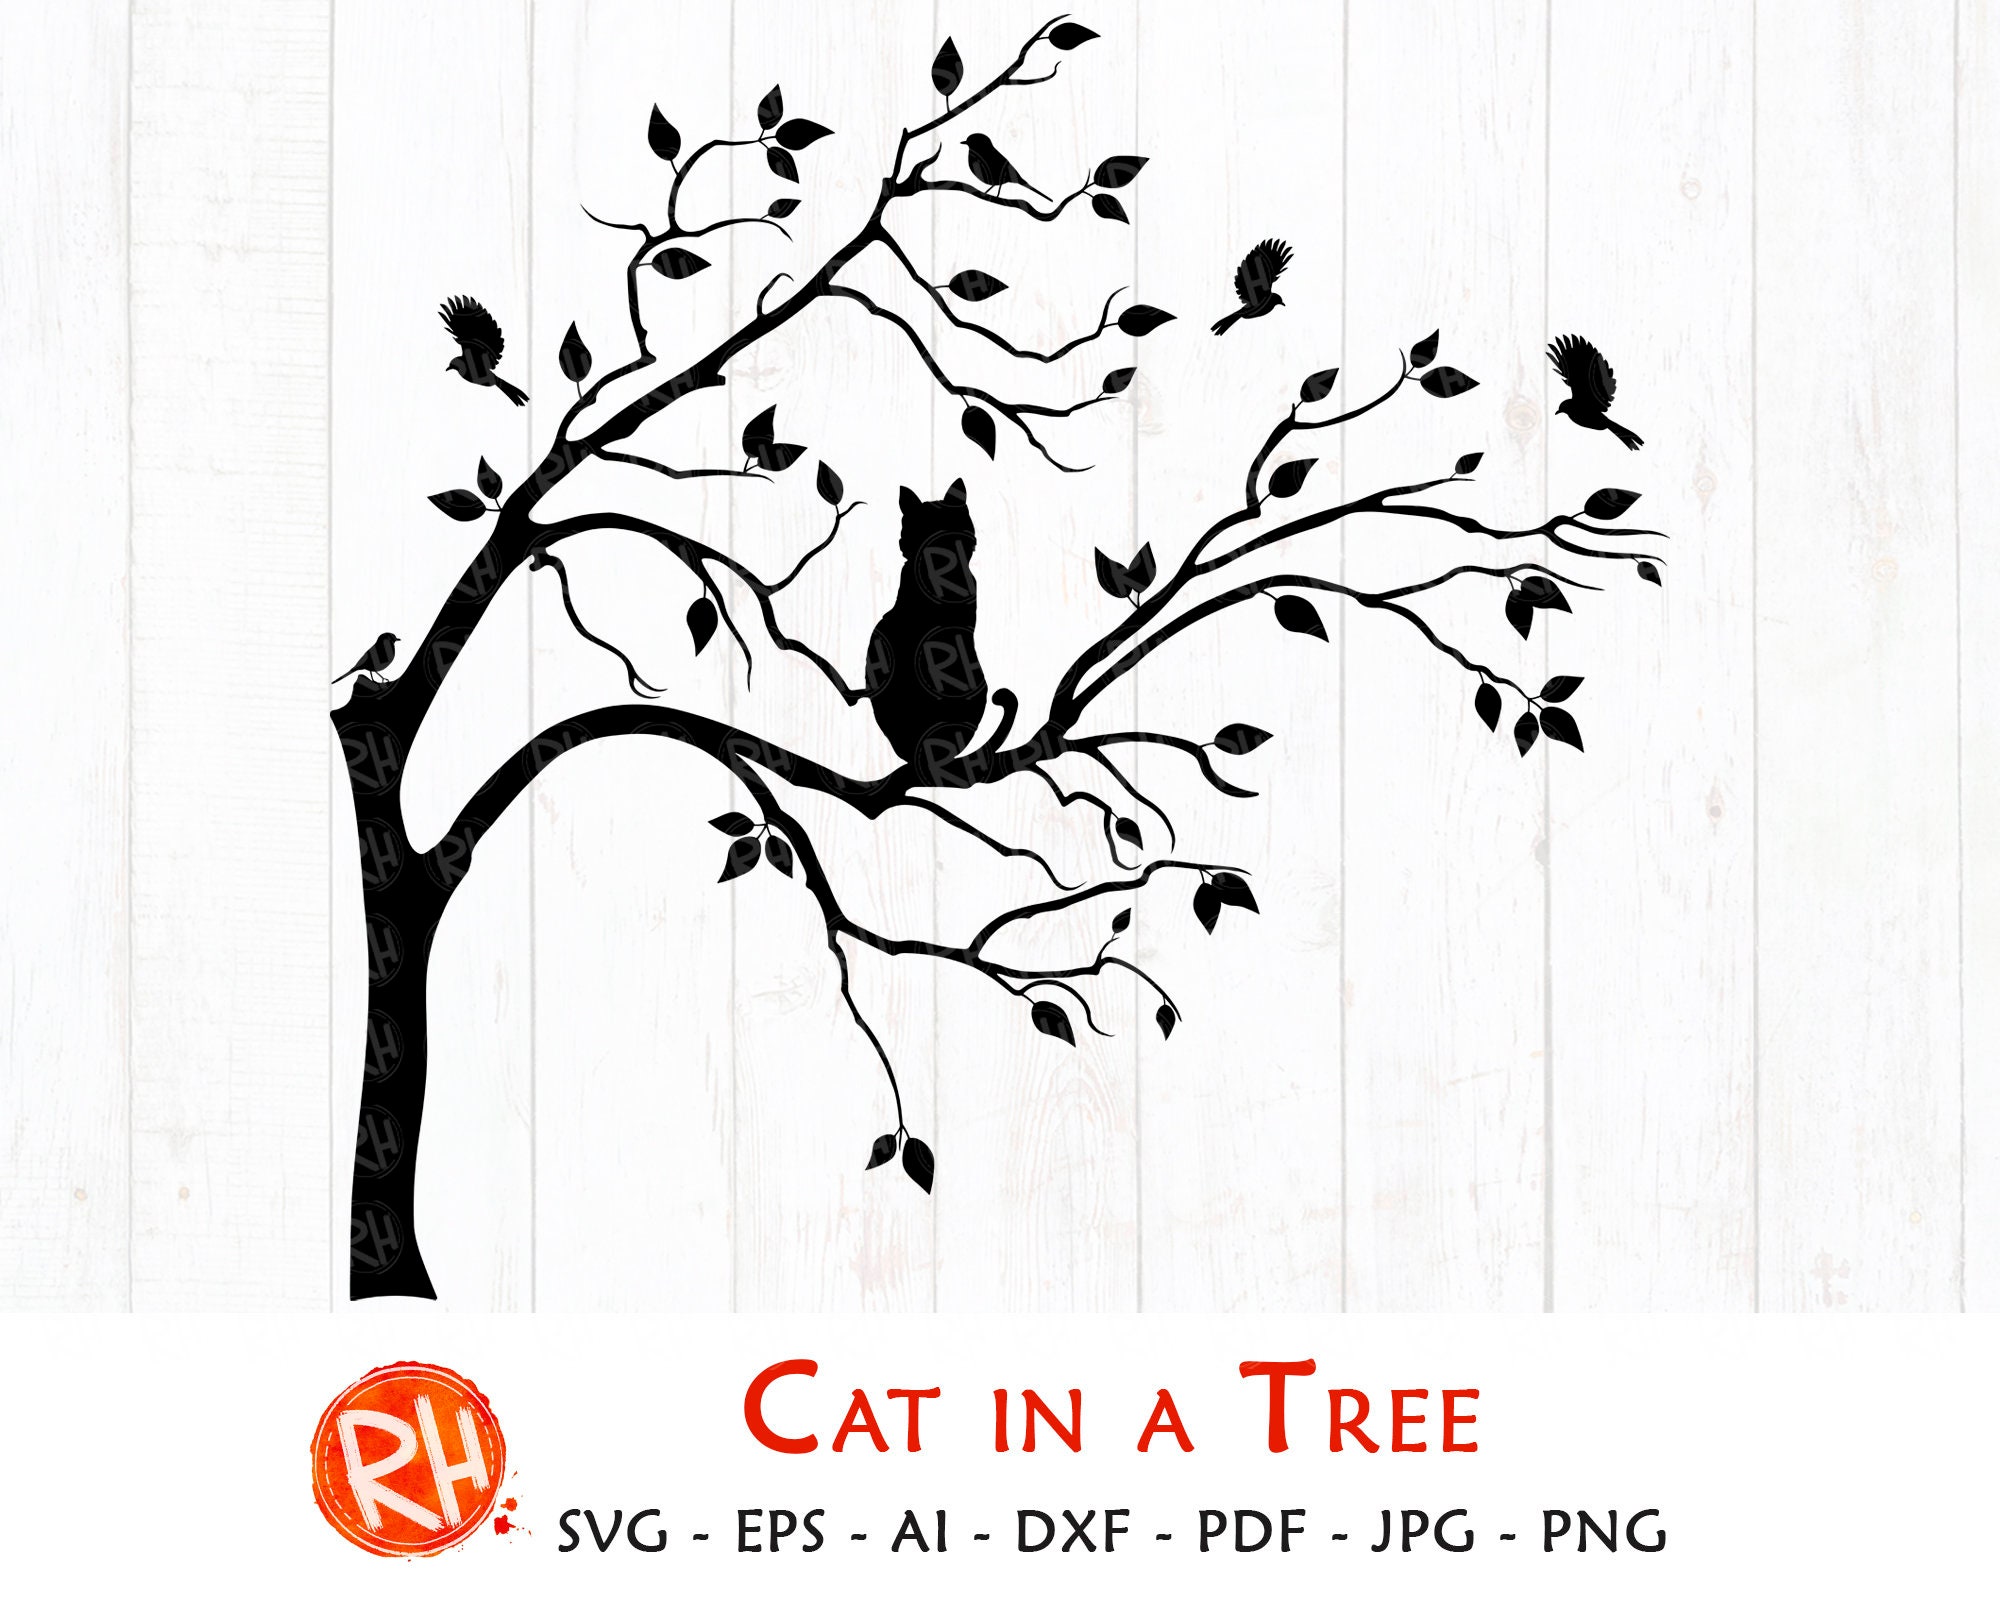 Tree Silhouette Svg Cat in a Tree Svg Tree Branch Svg | Etsy